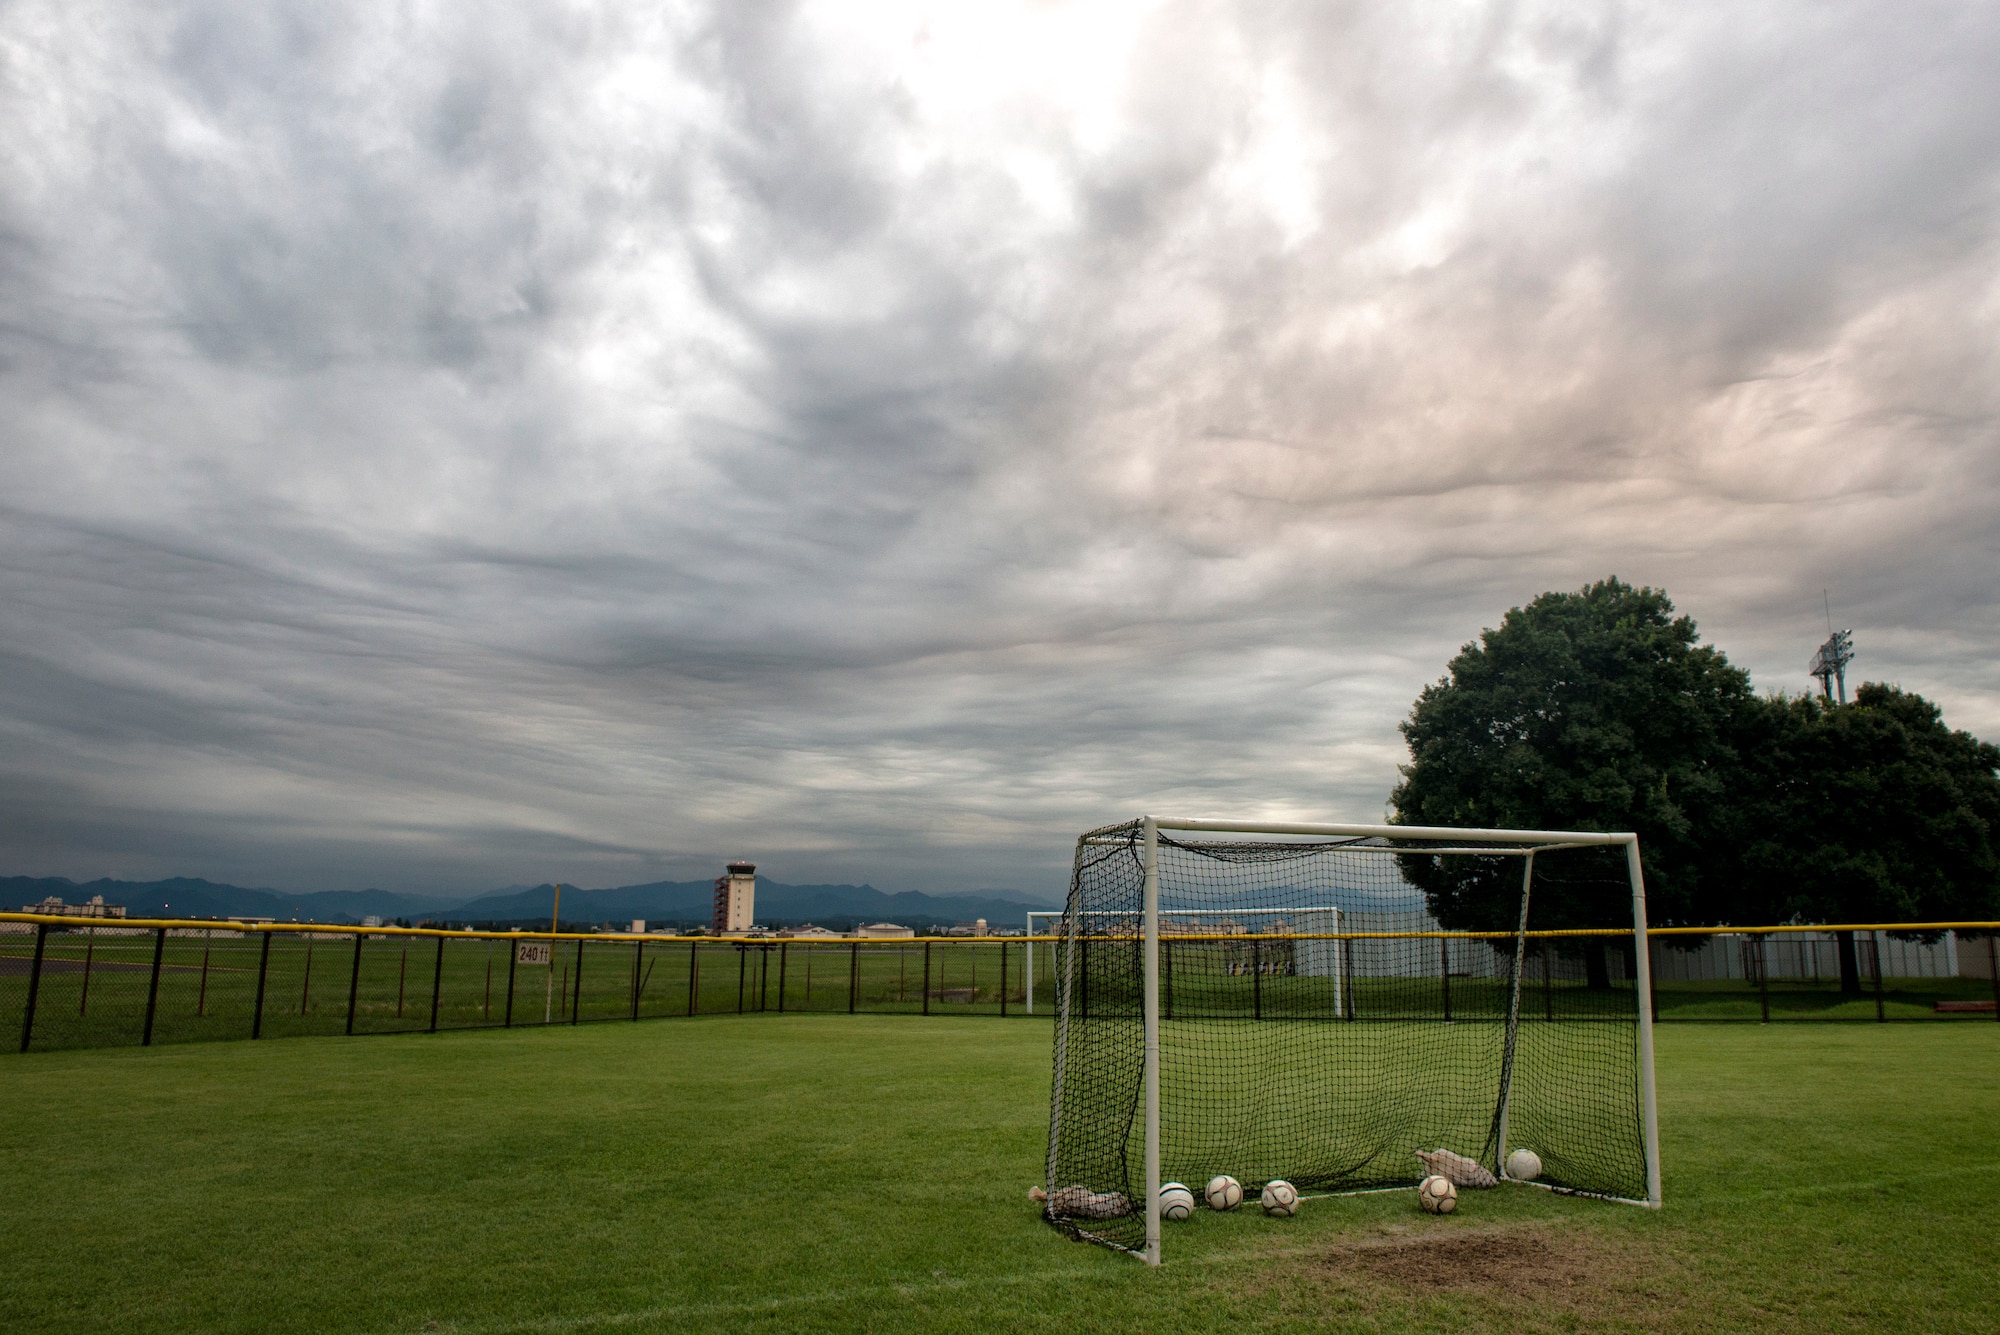 A goal post sits on Friendship Field at Yokota Air Base, Japan, Sept. 15, 2015. The field is home to Yokota’s Youth Soccer Program. (U.S. Air Force photo by Airman 1st Class Delano Scott/Released)